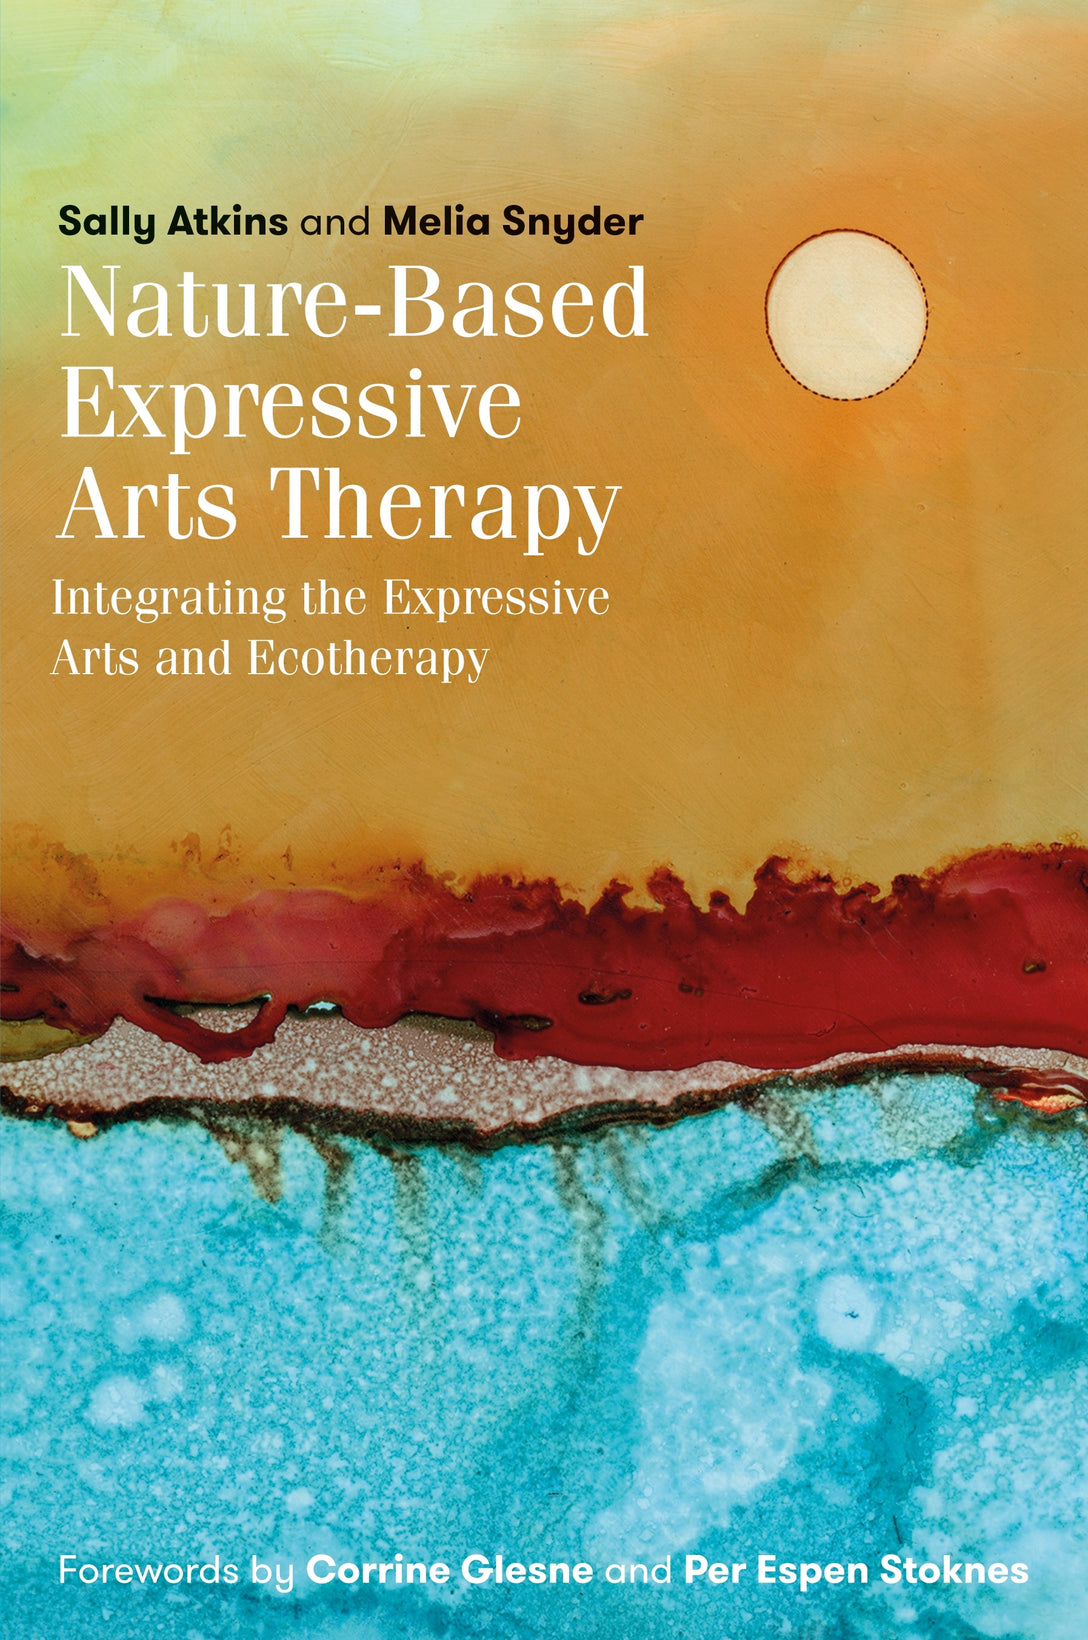 Nature-Based Expressive Arts Therapy by Per Espen Stoknes, Corrine Glesne, Sally Atkins, Melia Snyder